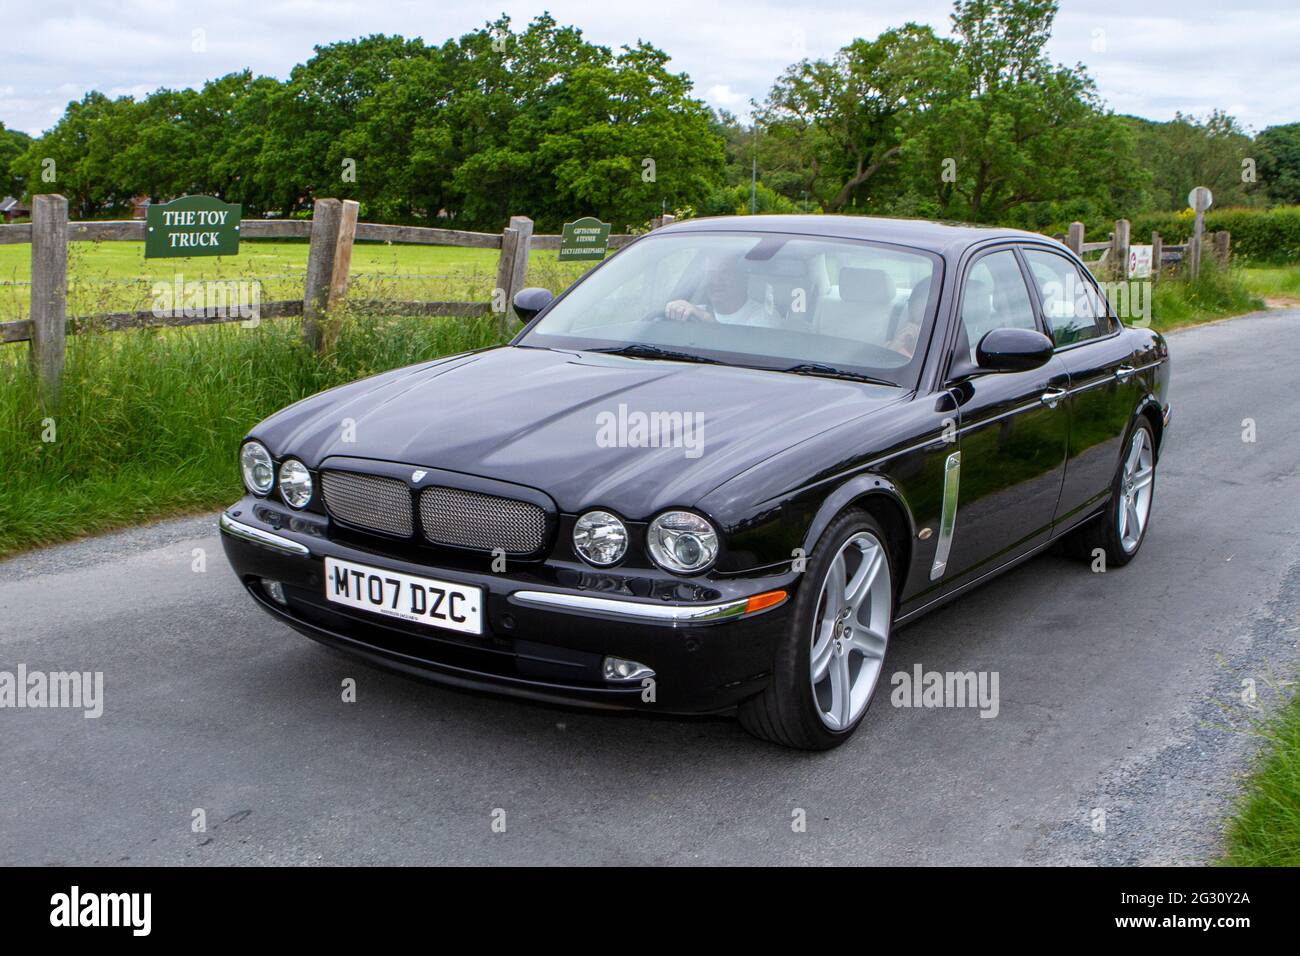 2007 black Jaguar Xj Sport Premium Tdvi A at the 58th Annual Manchester to Blackpool Vintage & Classic Car Run The event is a ‘Touring Assembly’ Stock Photo